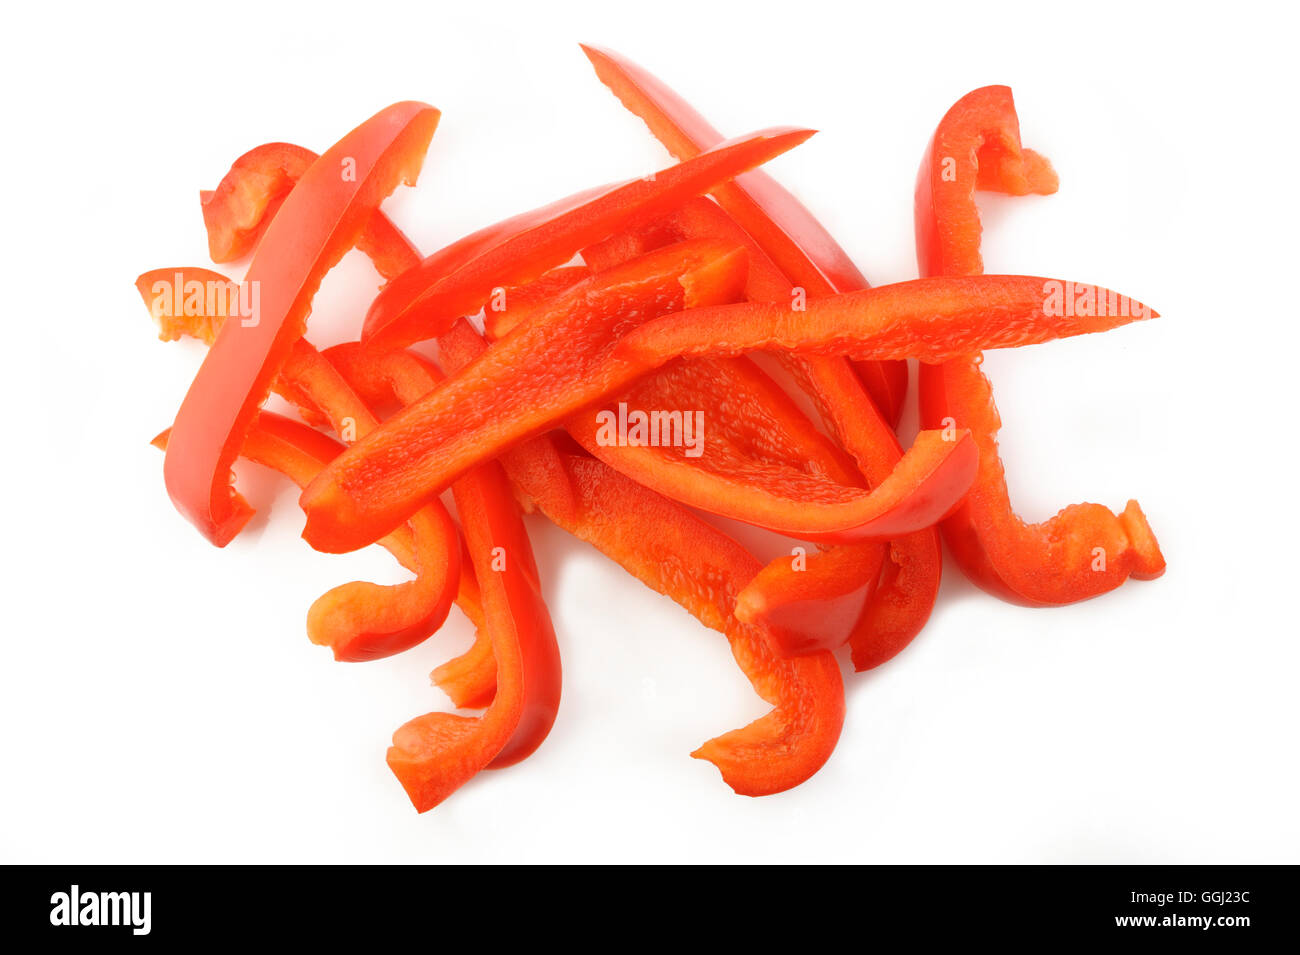 Sliced red pepper isolated on white background Stock Photo